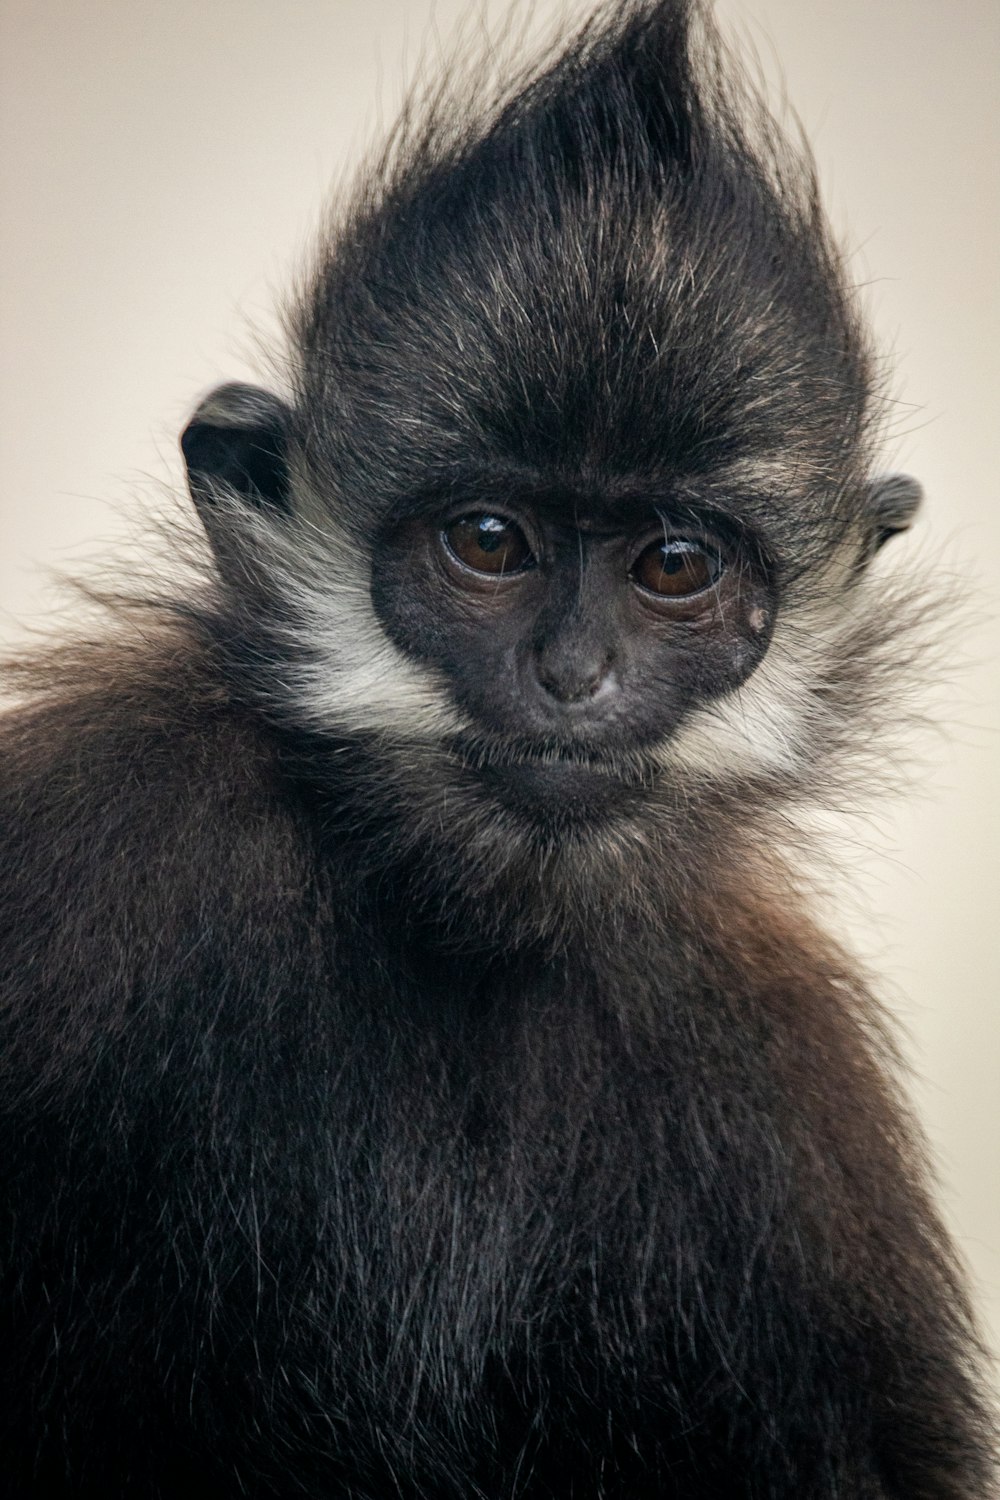 black and brown monkey in close up photography